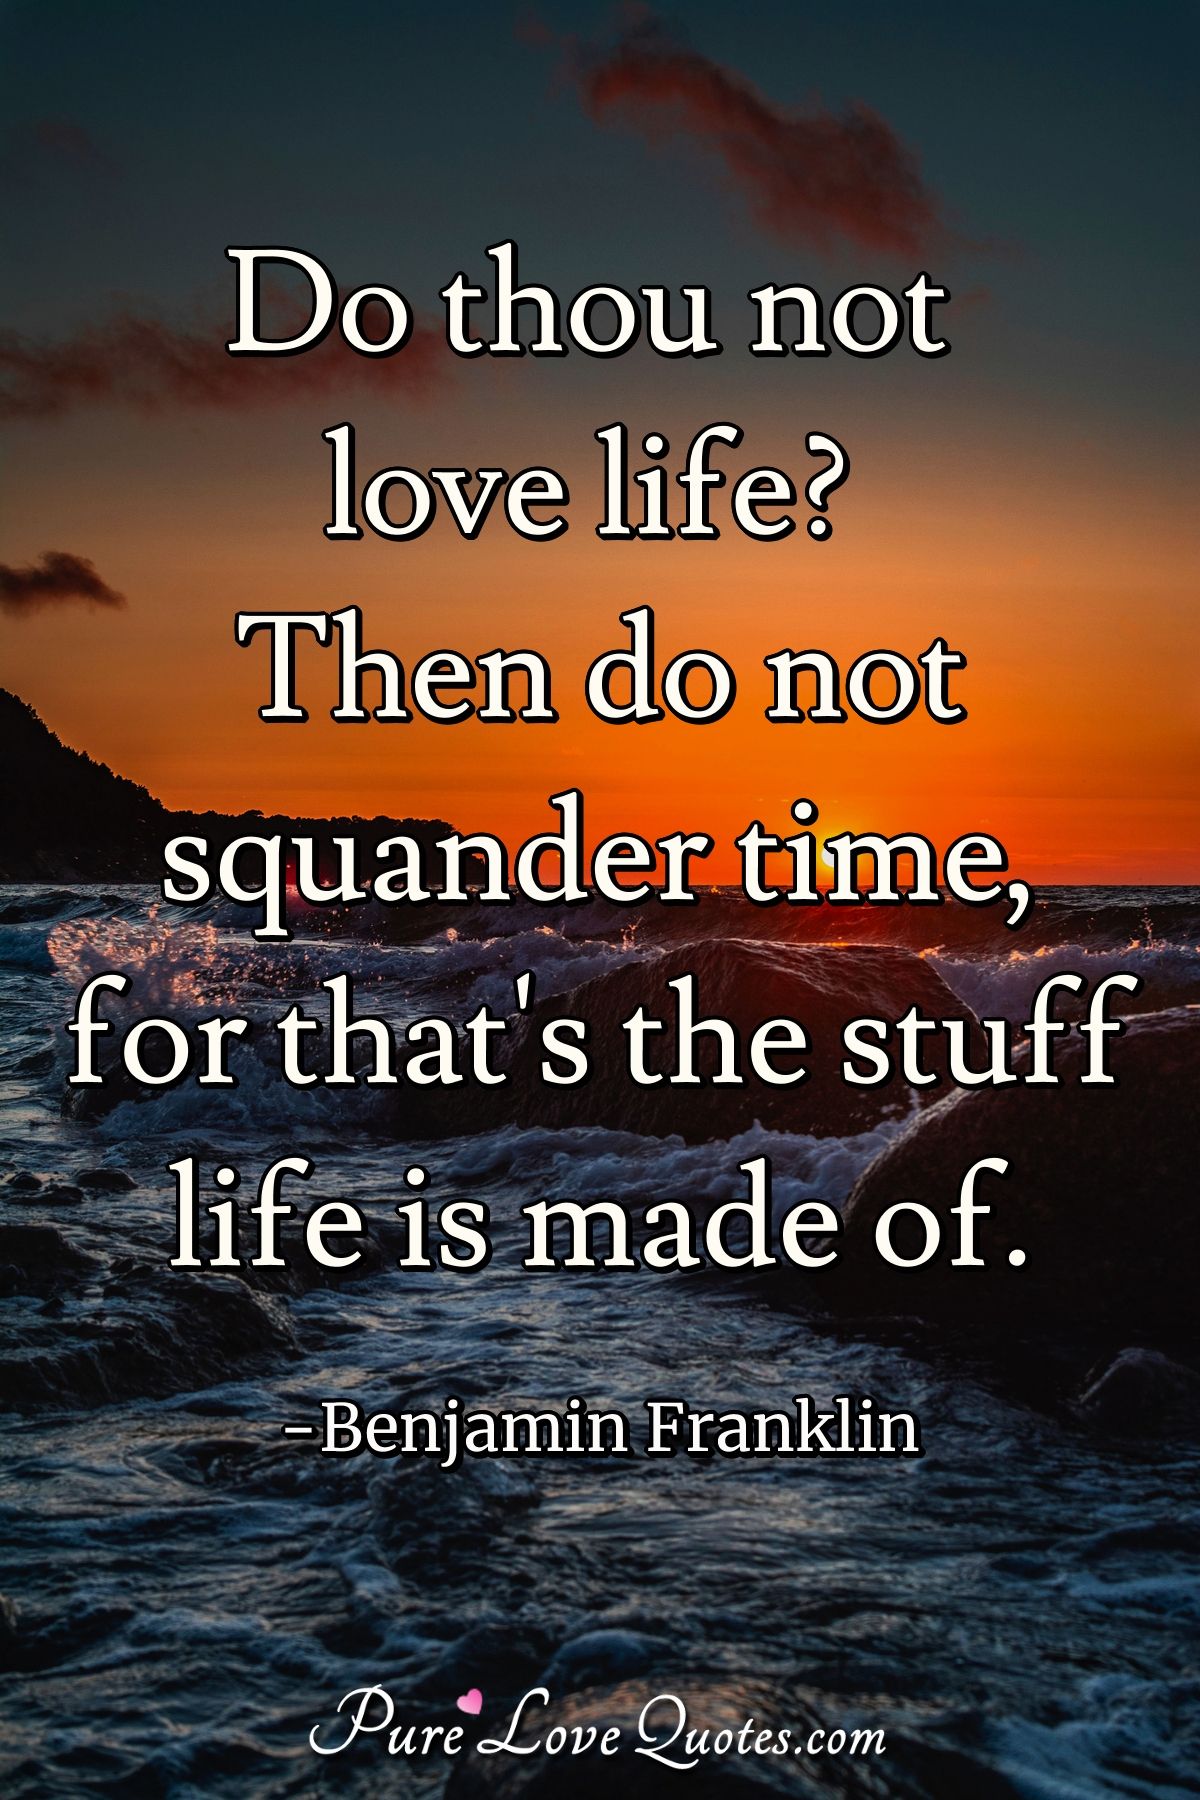 Do thou not love life? Then do not squander time, for that's the stuff life is made of. - Benjamin Franklin